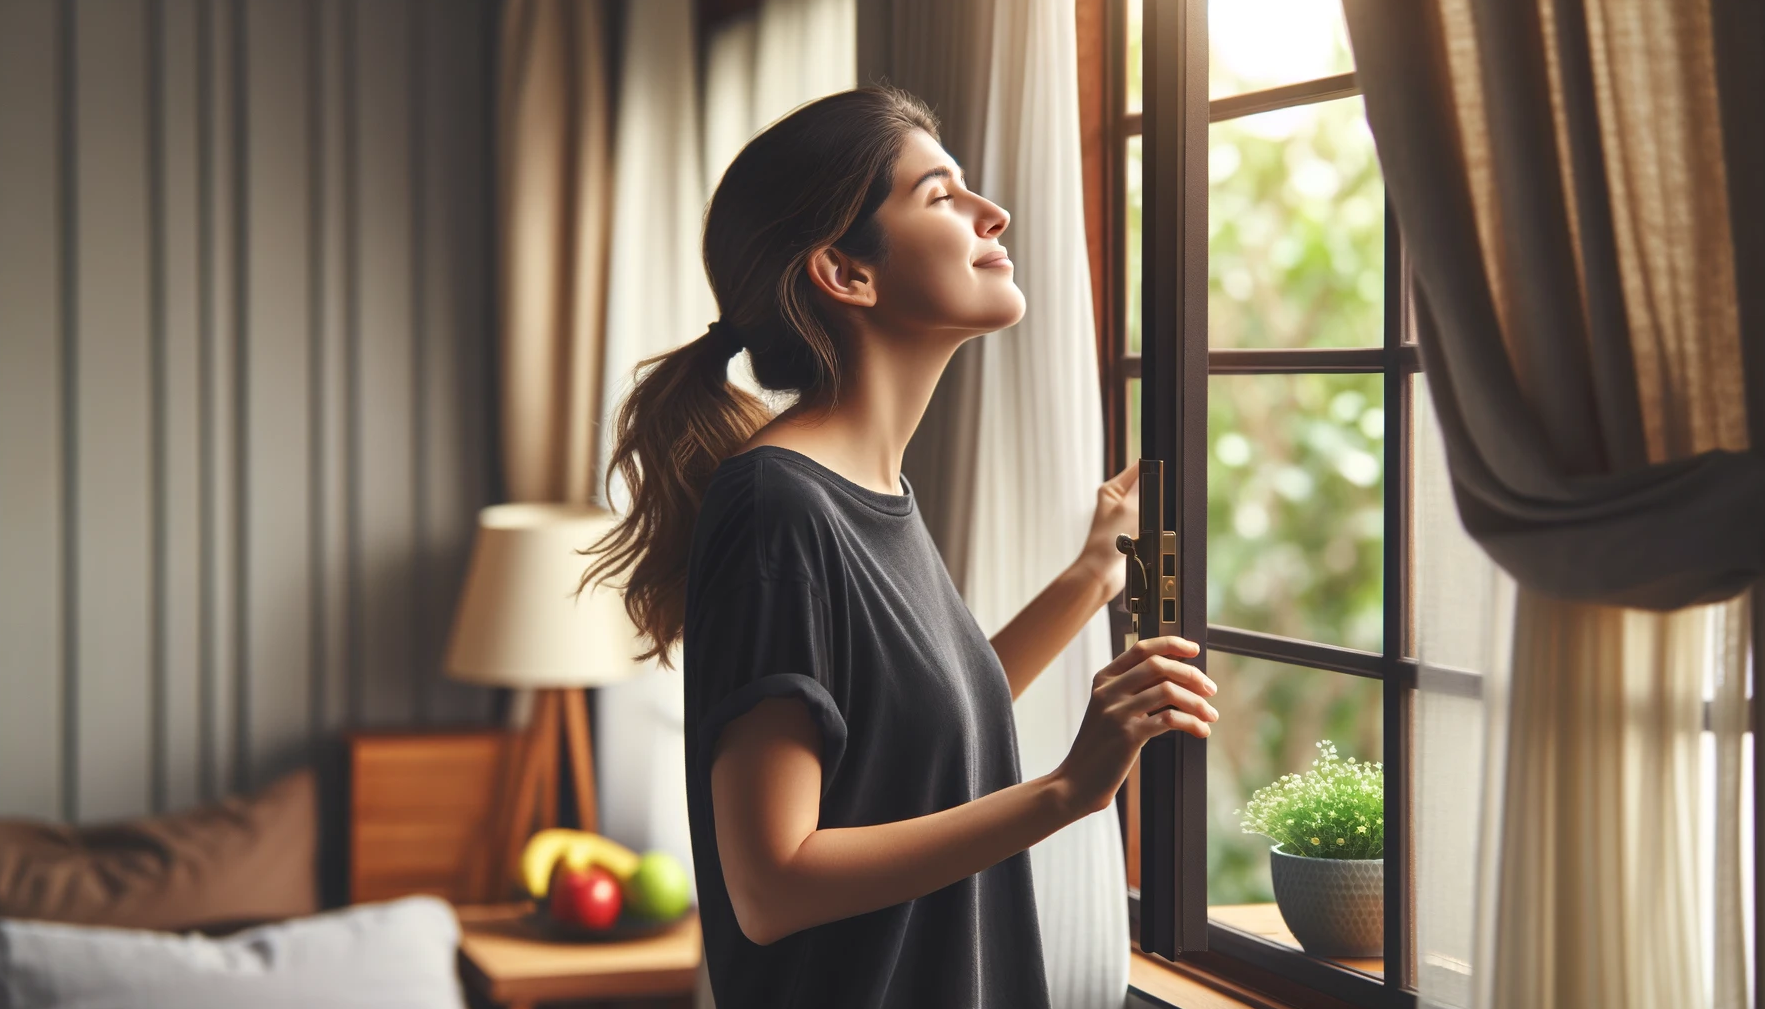 Woman opening a window to air out the house